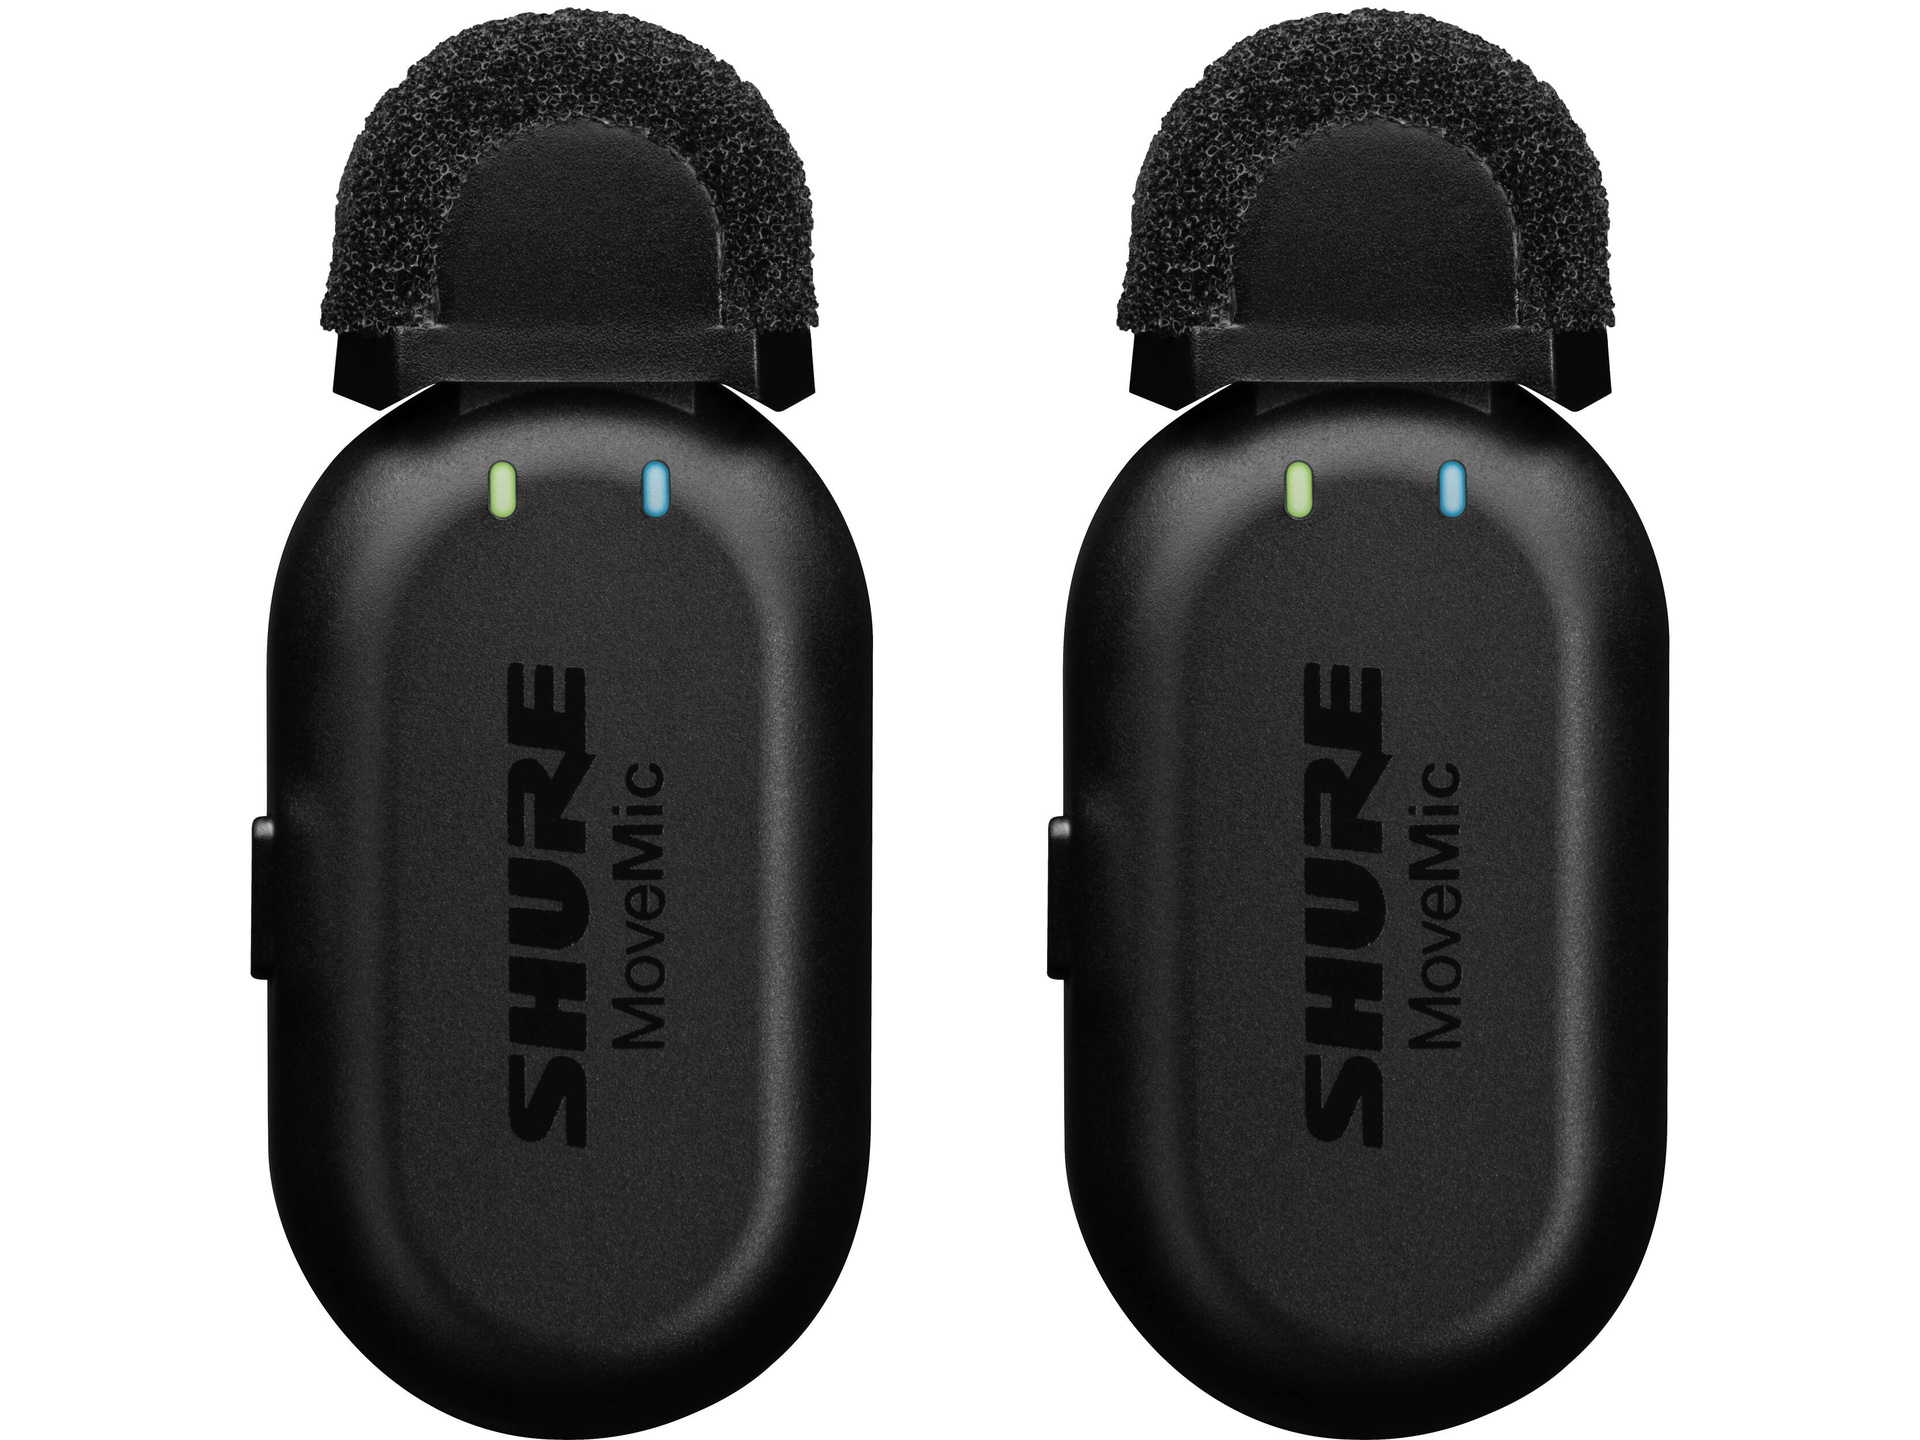 Shure MoveMic Two 2-Person Clip-On Wireless Microphone System for Mobile Devices